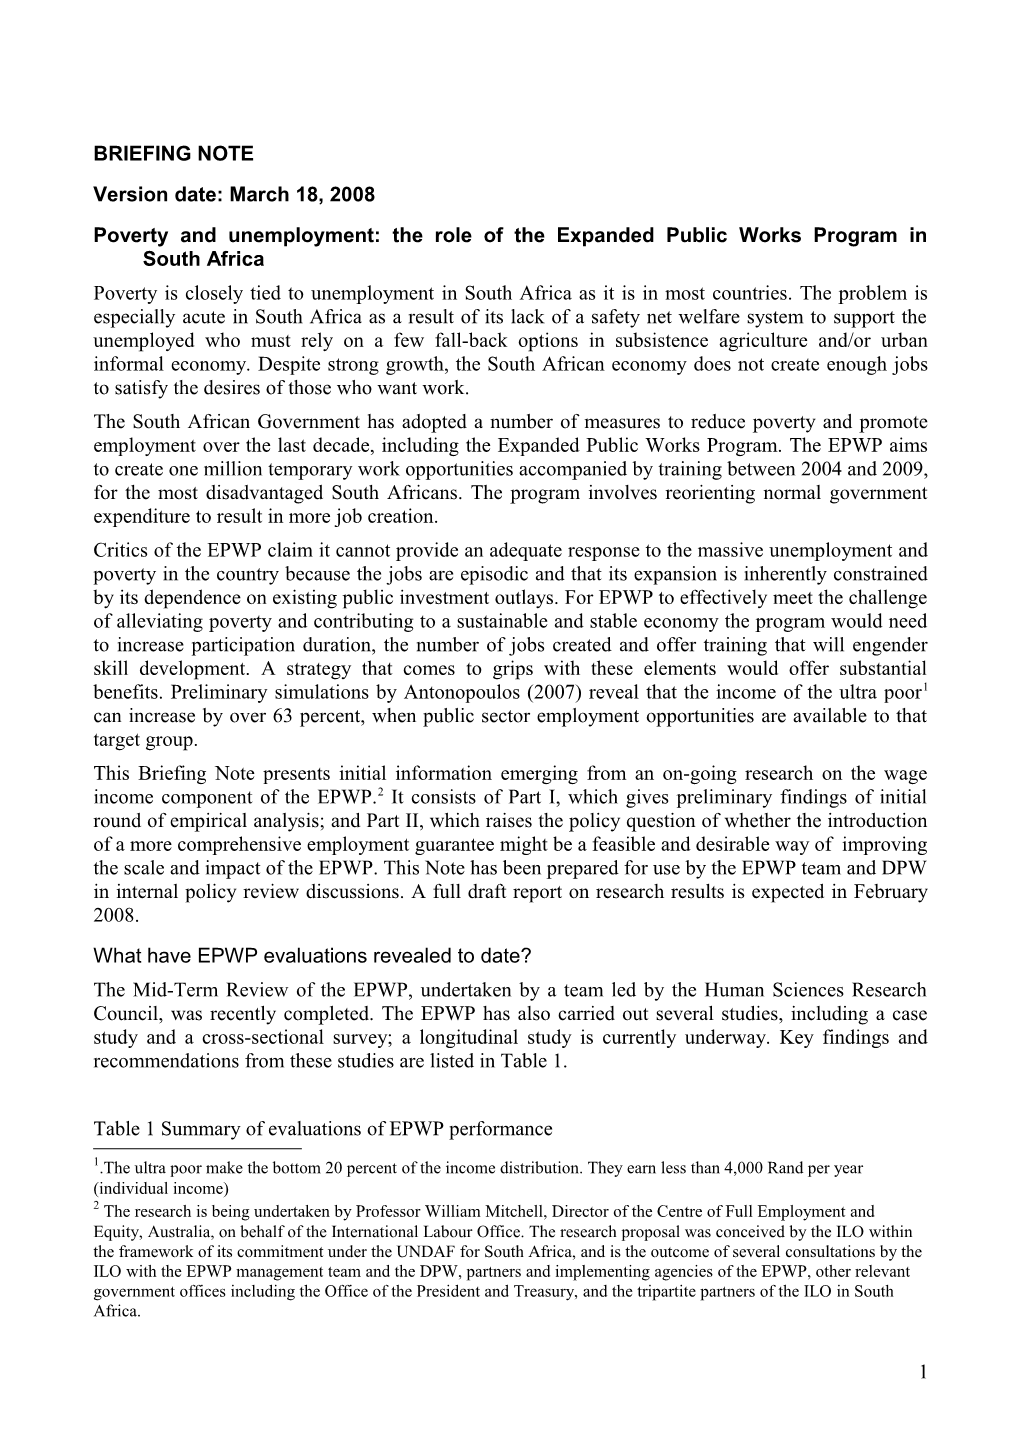 Poverty and Unemployment: the Role of the Expanded Public Works Program in South Africa